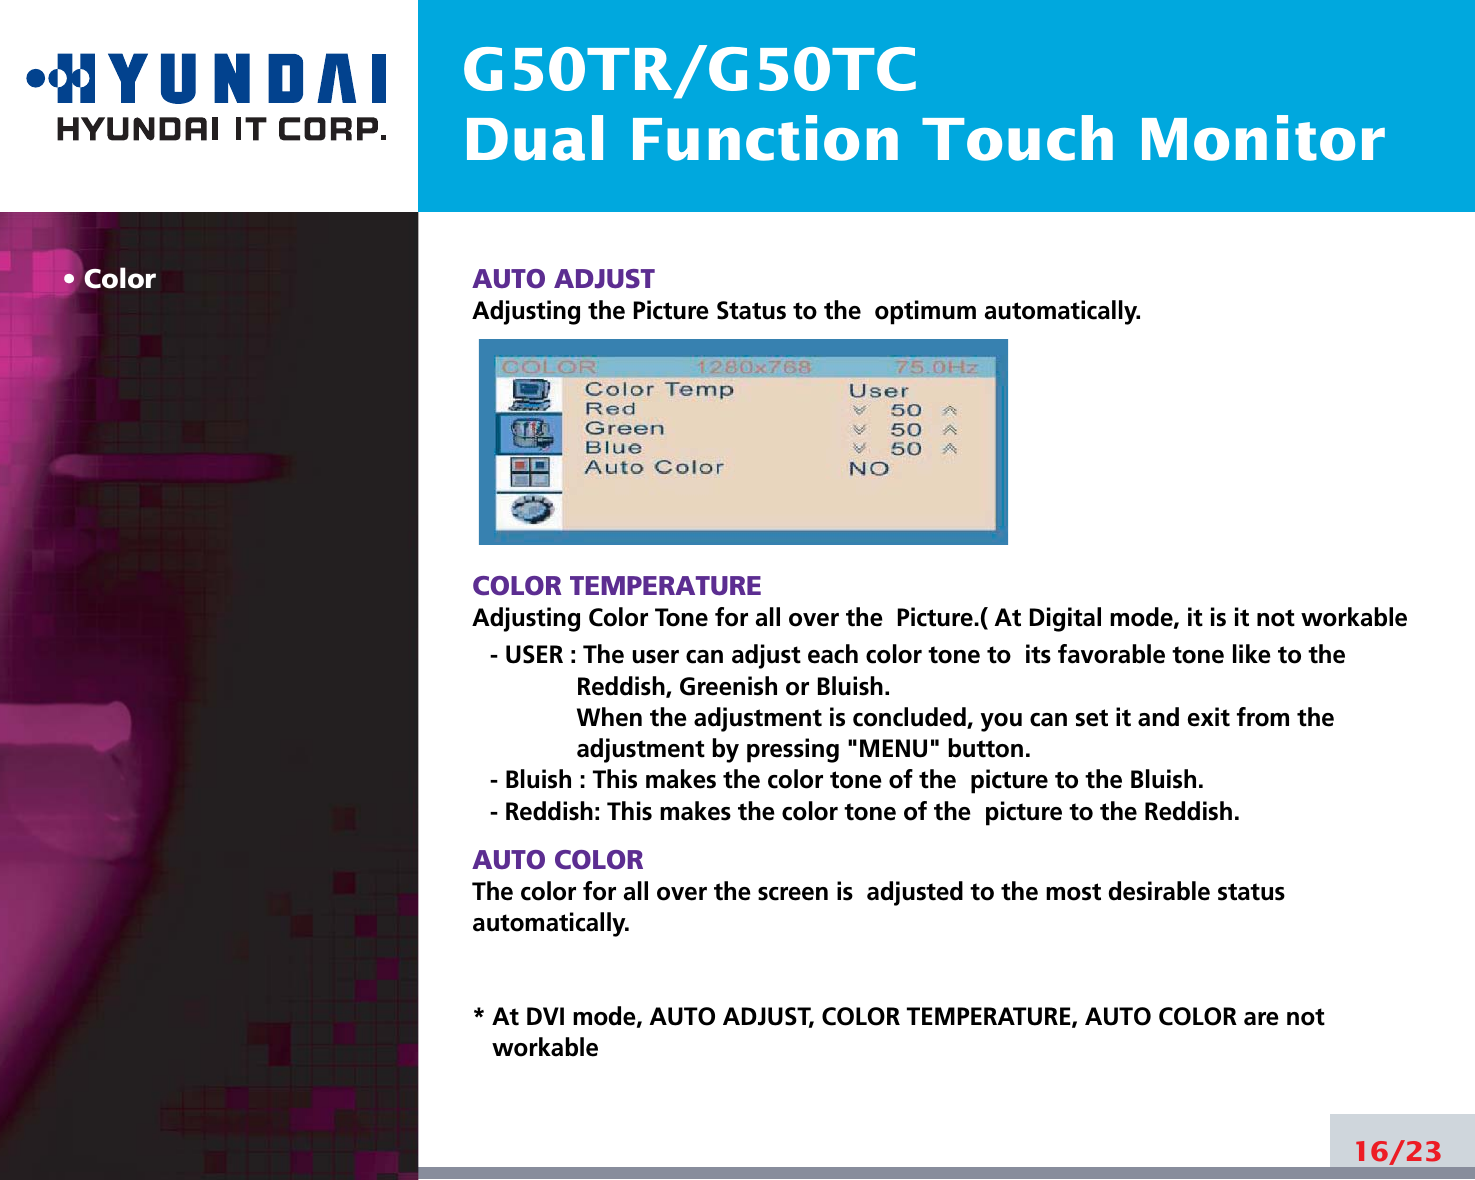 G50TR/G50TCDual Function Touch MonitorColor AUTO ADJUSTAdjusting the Picture Status to the  optimum automatically. COLOR TEMPERATUREAdjusting Color Tone for all over the  Picture.( At Digital mode, it is it not workable- USER : The user can adjust each color tone to  its favorable tone like to theReddish, Greenish or Bluish.When the adjustment is concluded, you can set it and exit from theadjustment by pressing &quot;MENU&quot; button.- Bluish : This makes the color tone of the  picture to the Bluish.- Reddish: This makes the color tone of the  picture to the Reddish.AUTO COLORThe color for all over the screen is  adjusted to the most desirable statusautomatically.* At DVI mode, AUTO ADJUST, COLOR TEMPERATURE, AUTO COLOR are notworkable16/23